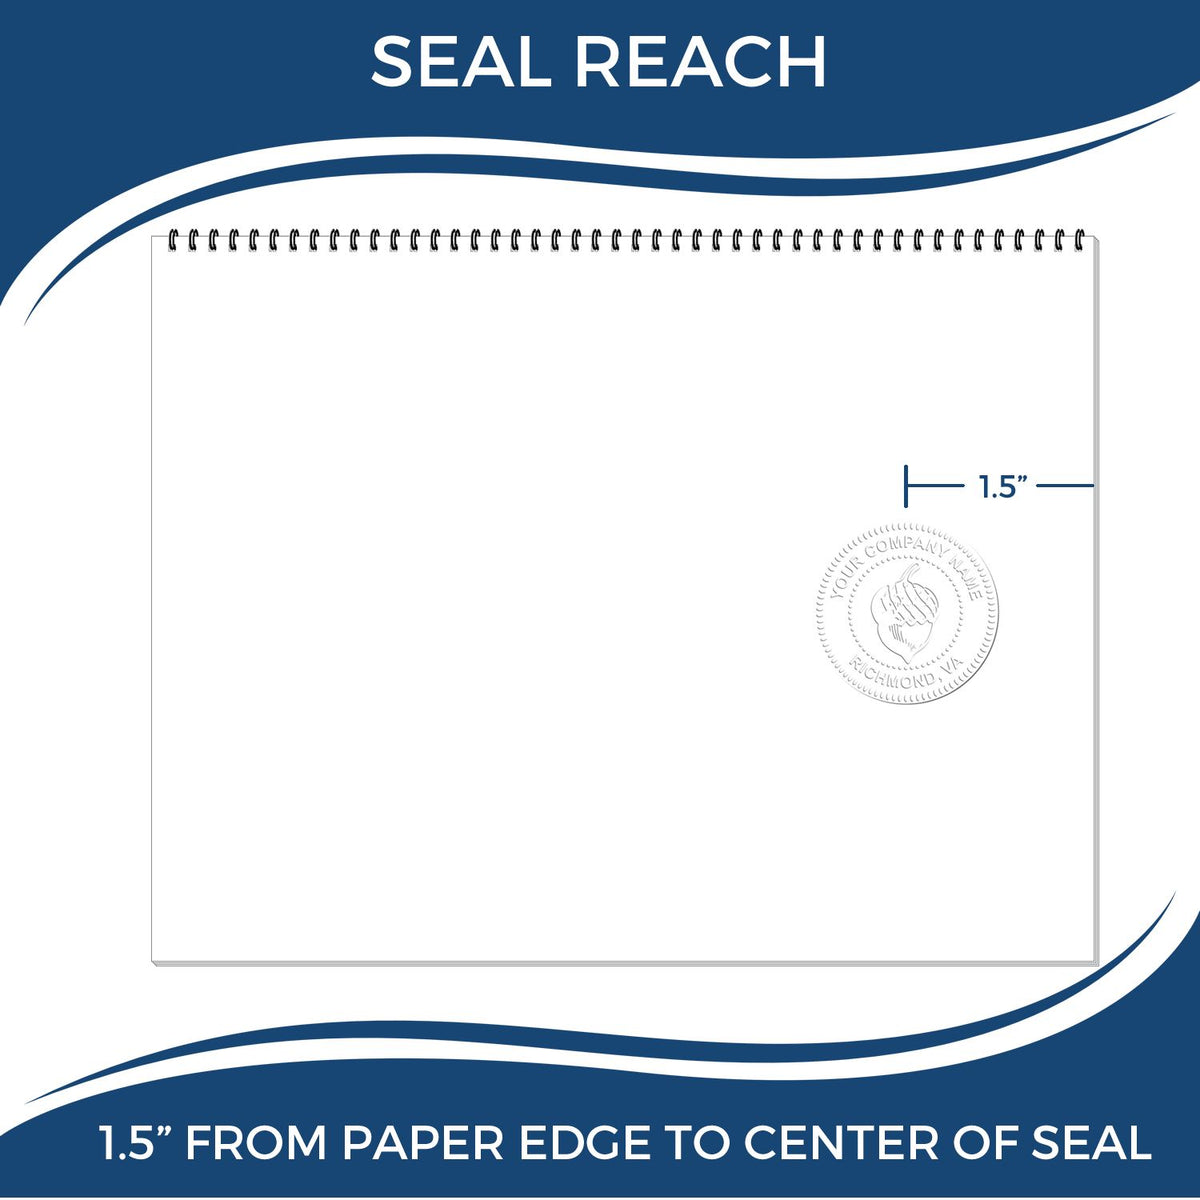 An infographic showing the seal reach which is represented by a ruler and a miniature seal image of the Handheld Missouri Architect Seal Embosser